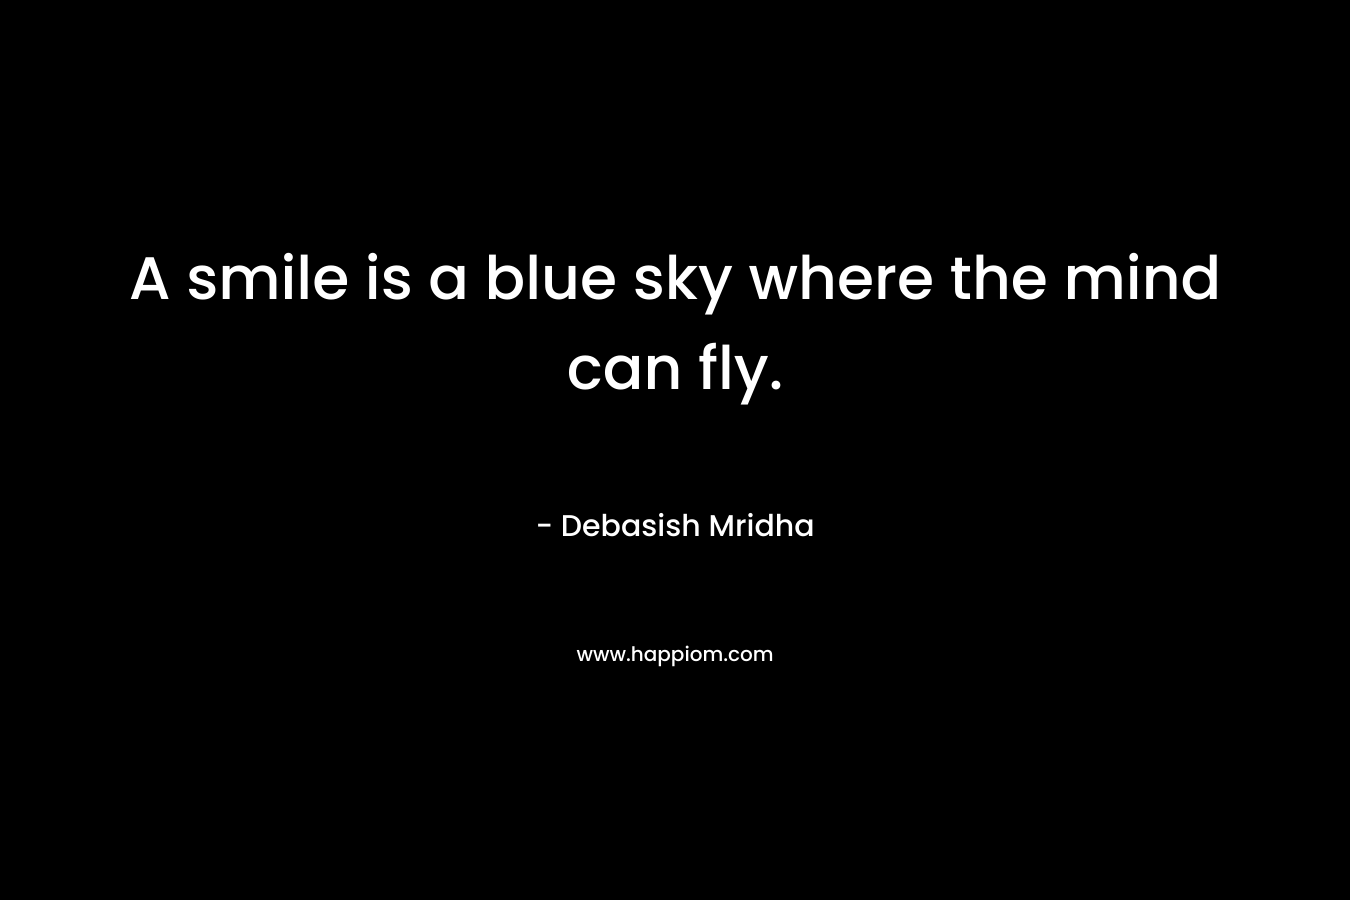 A smile is a blue sky where the mind can fly.